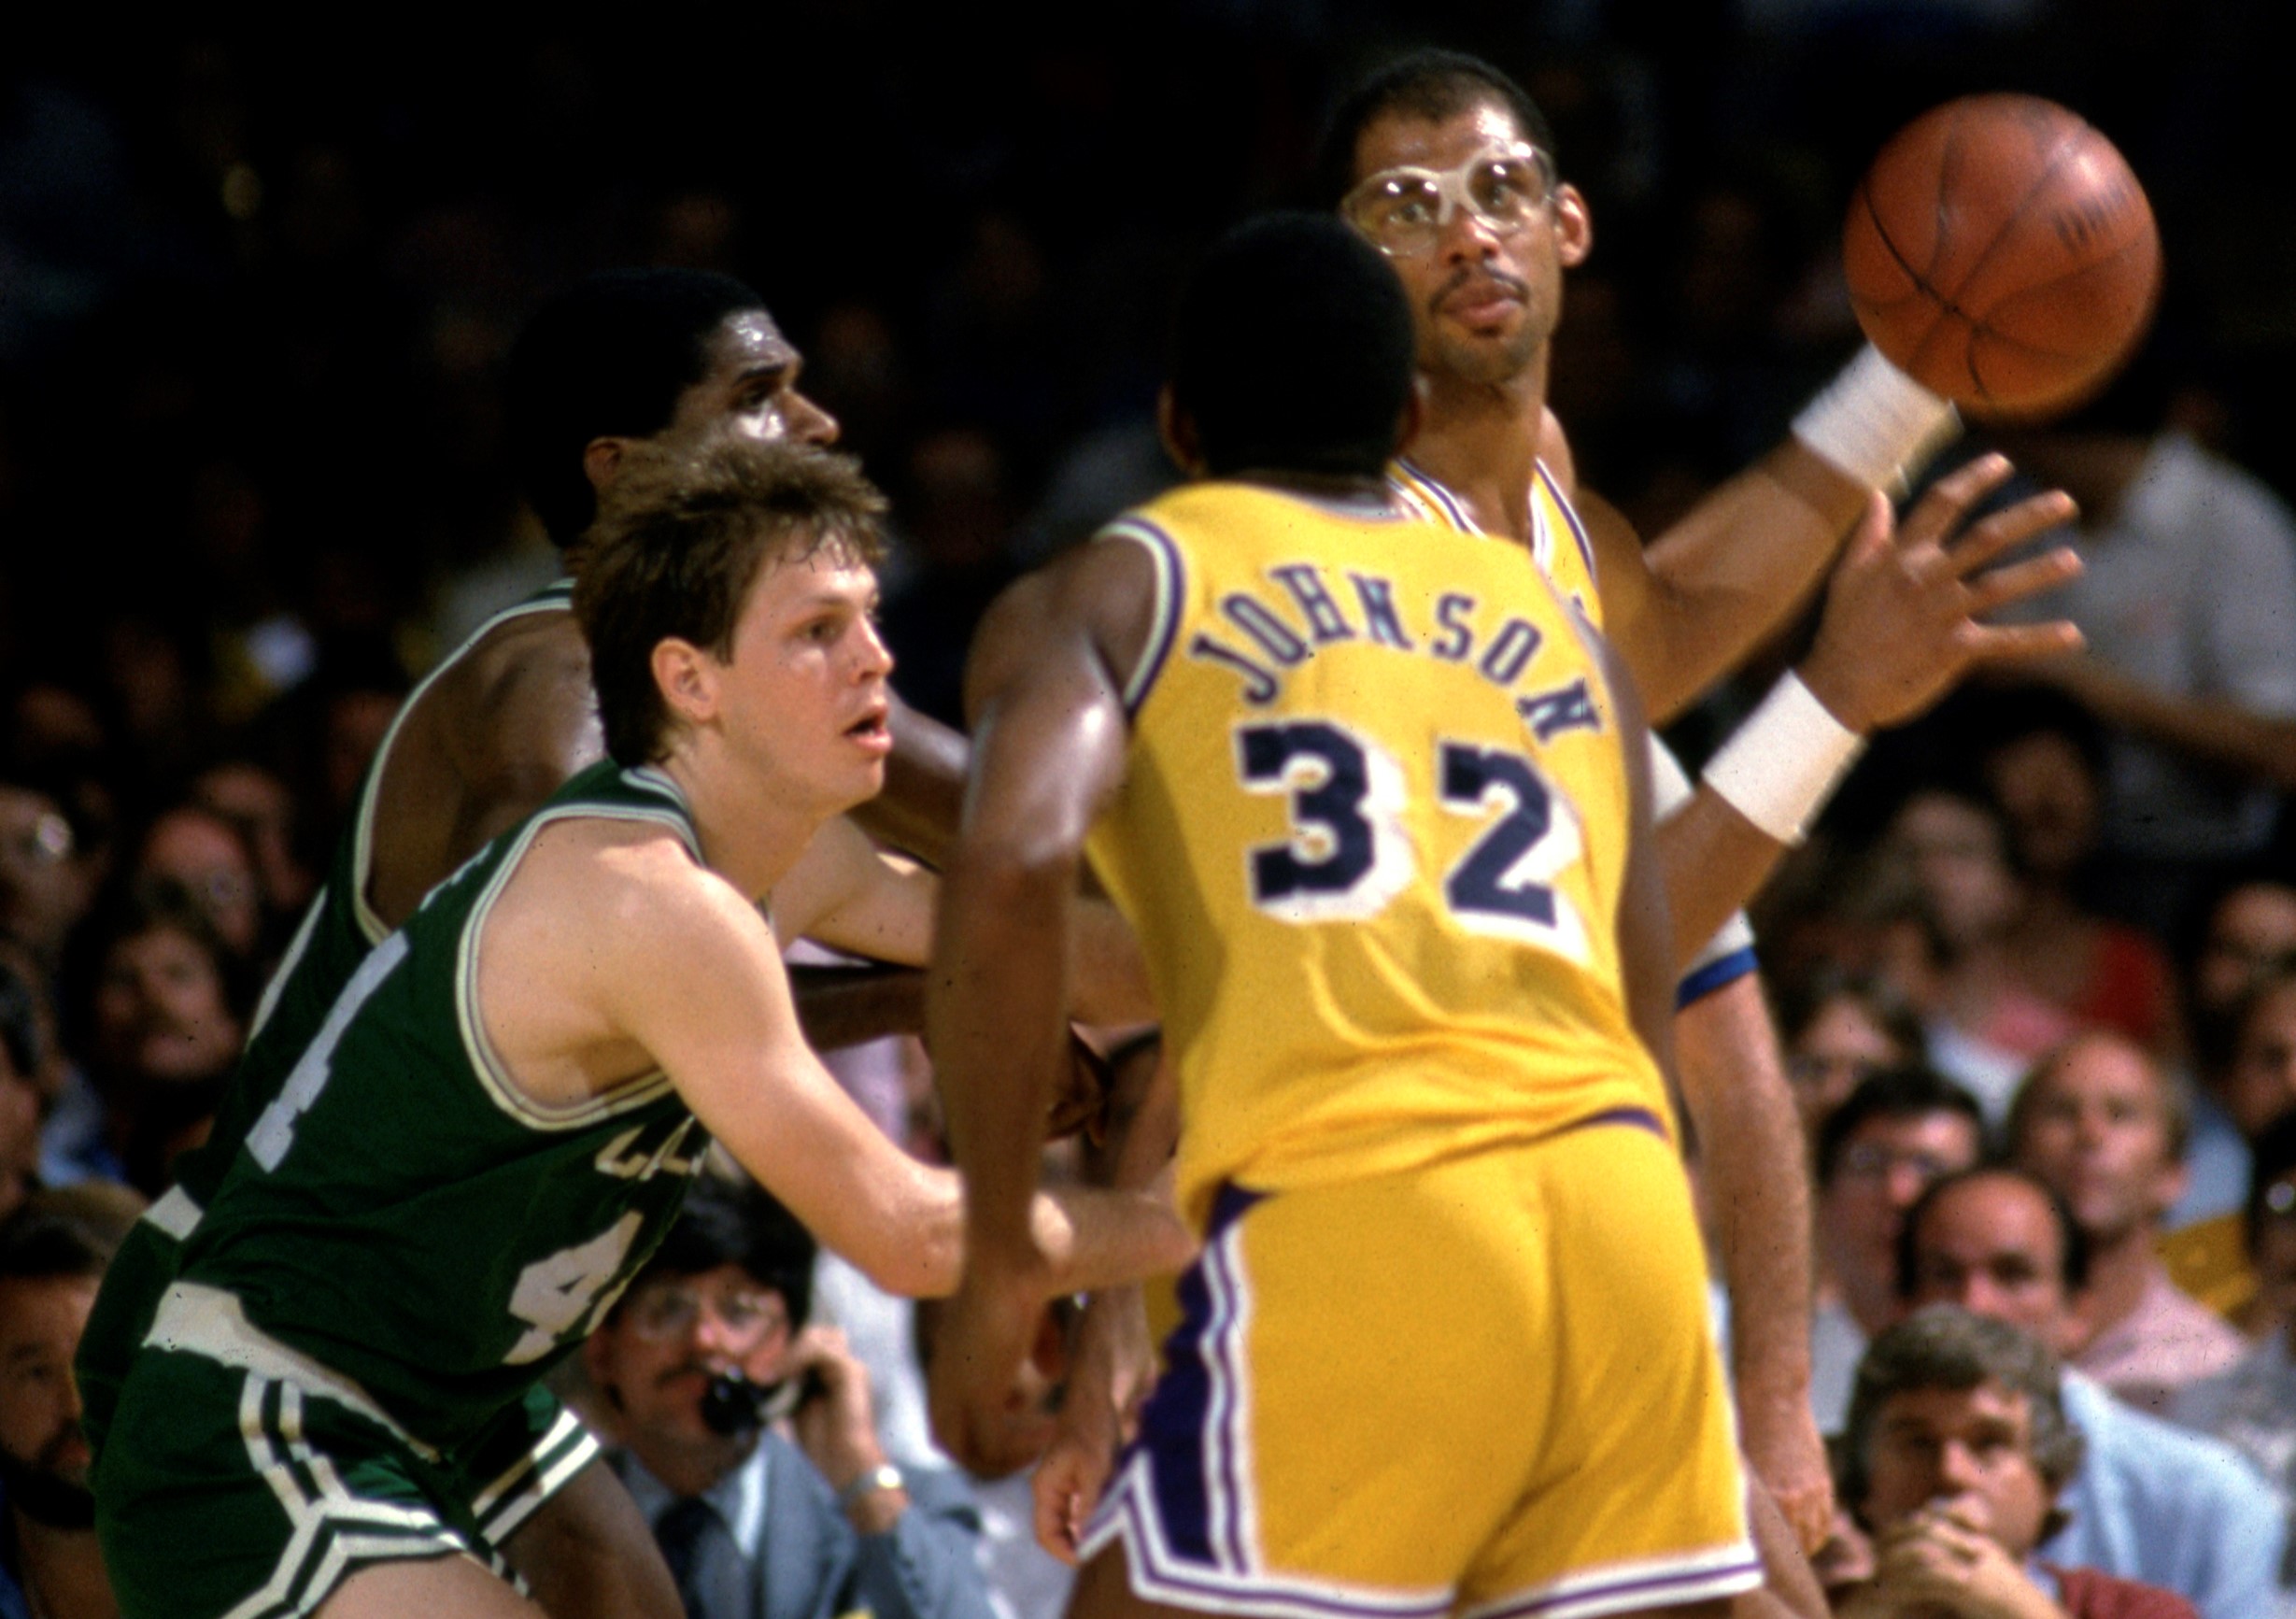 Lakers center Kareem Abdul-Jabbar looks to pass to Magic Johnson who is covered by Celtics guard Danny Ainge.